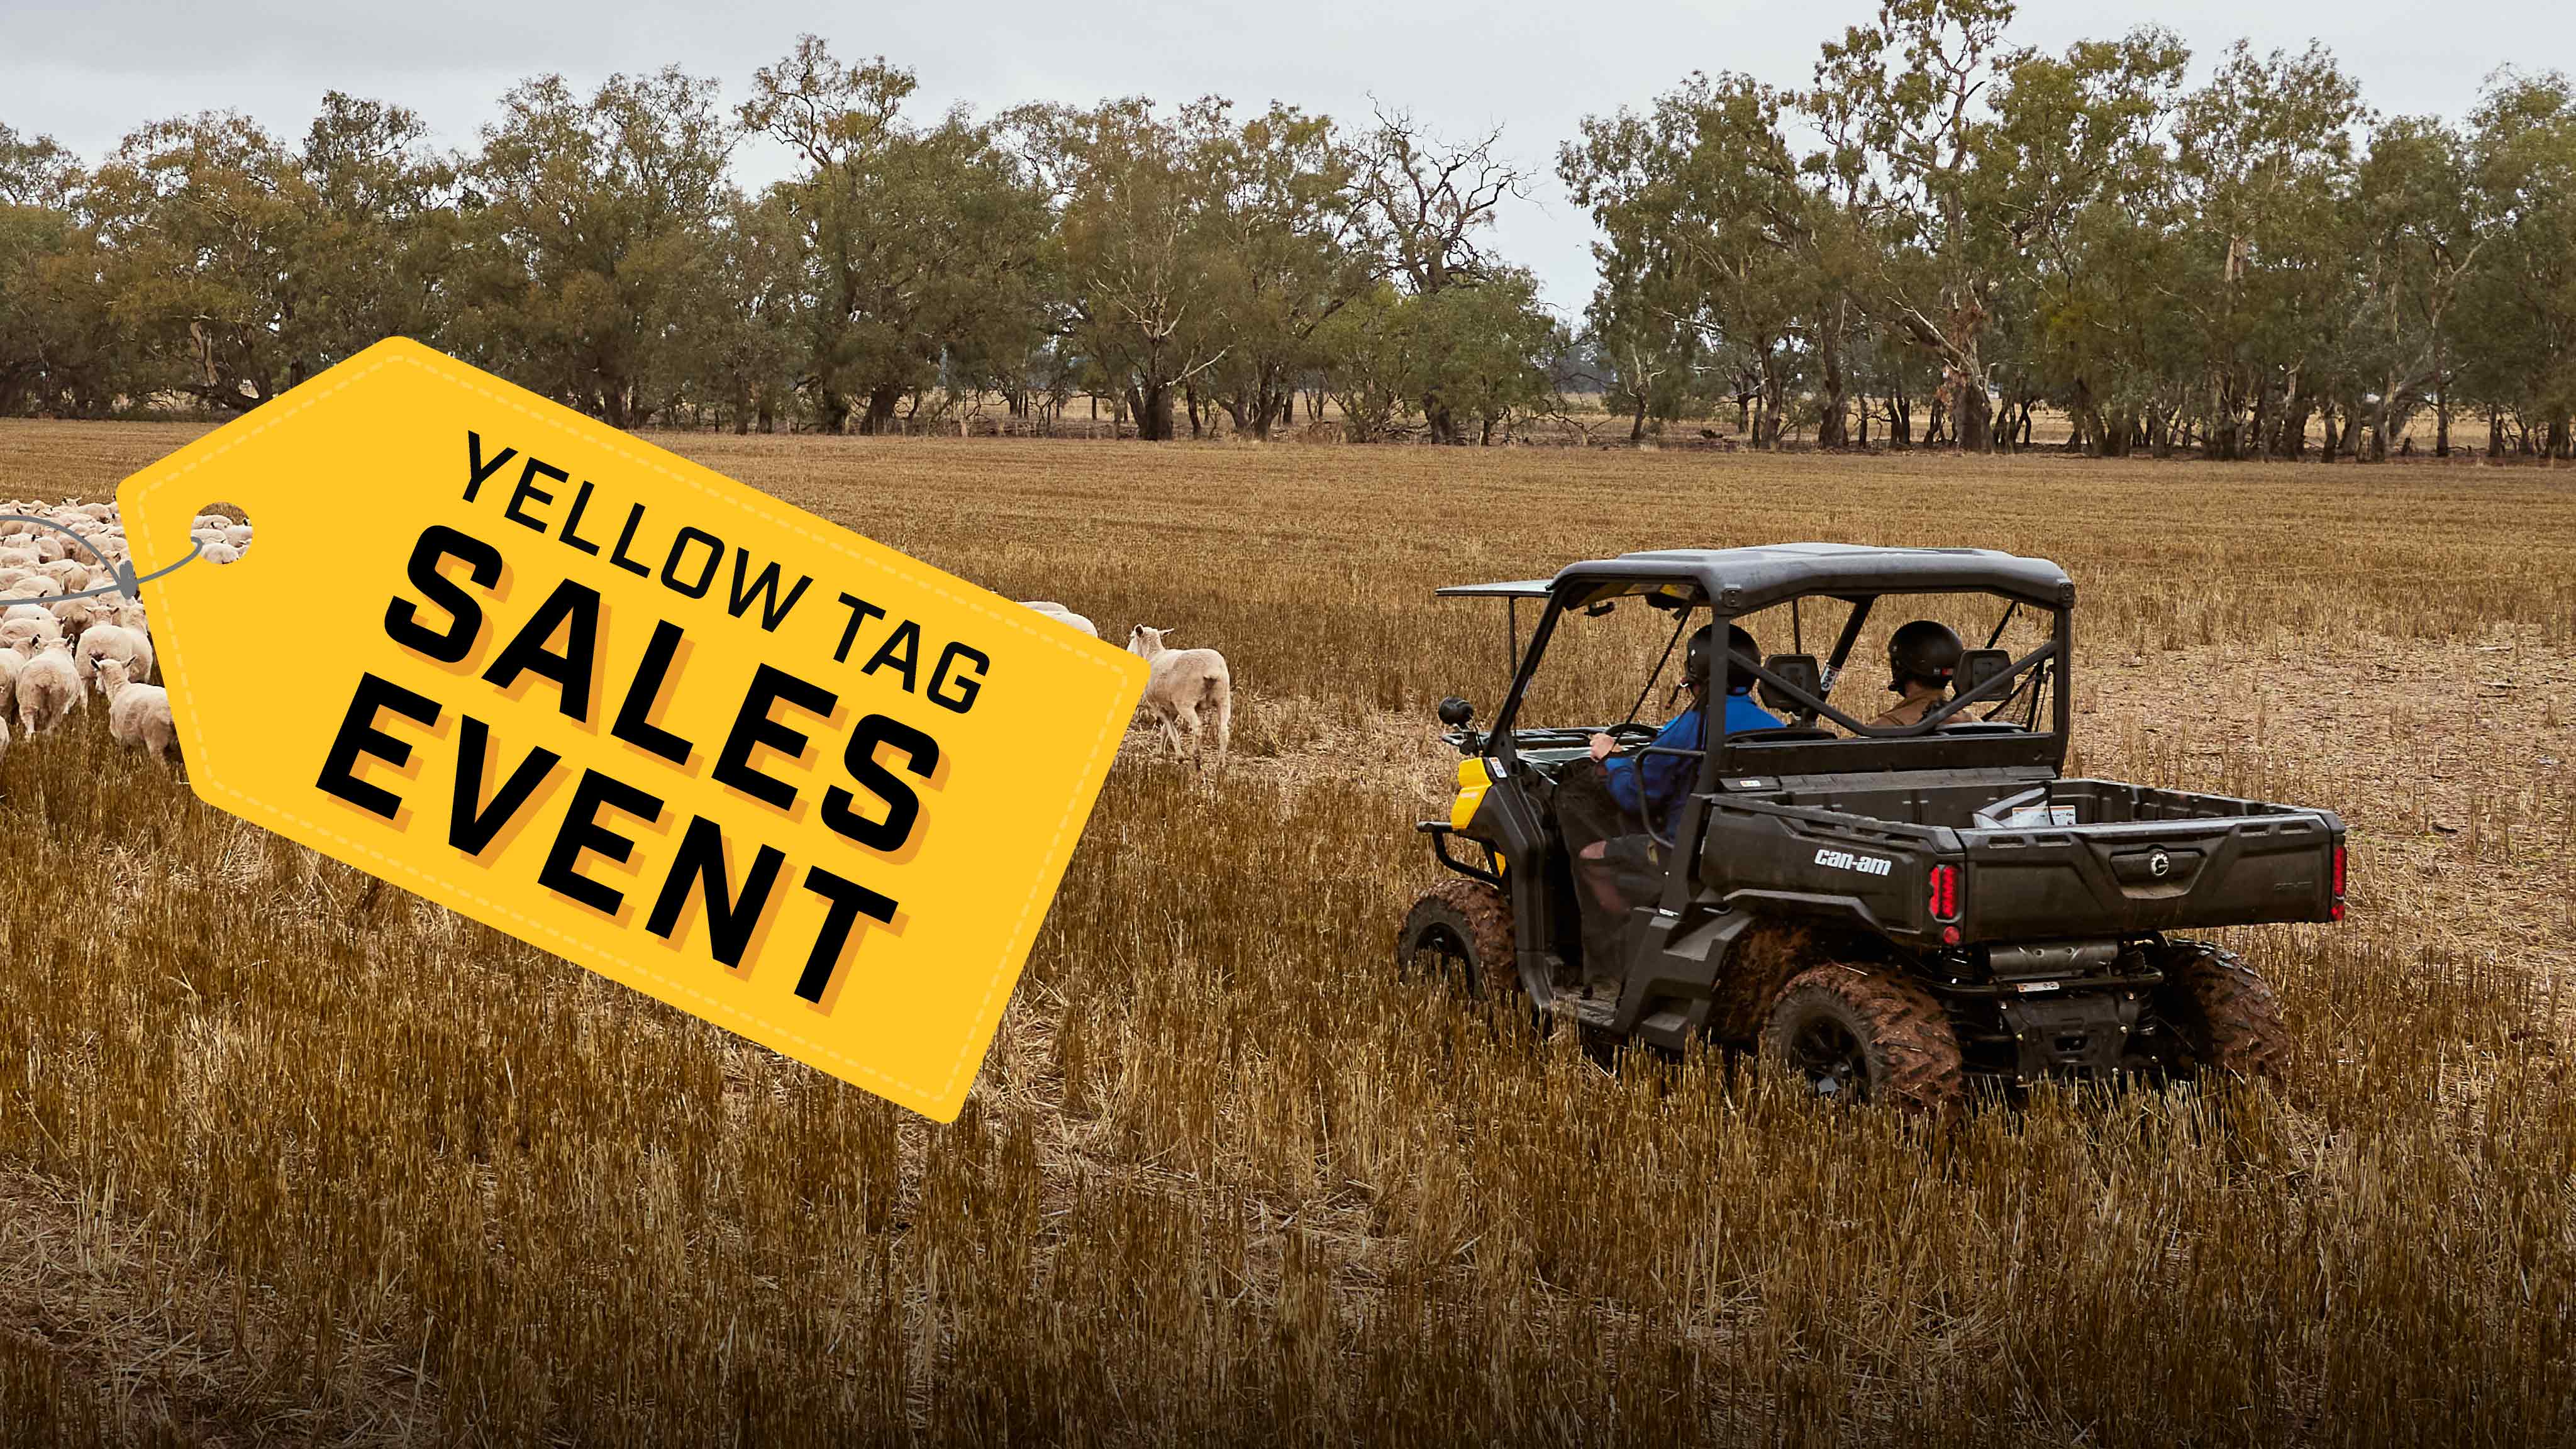 Can-Am Yellow Tag Defender Sales Event